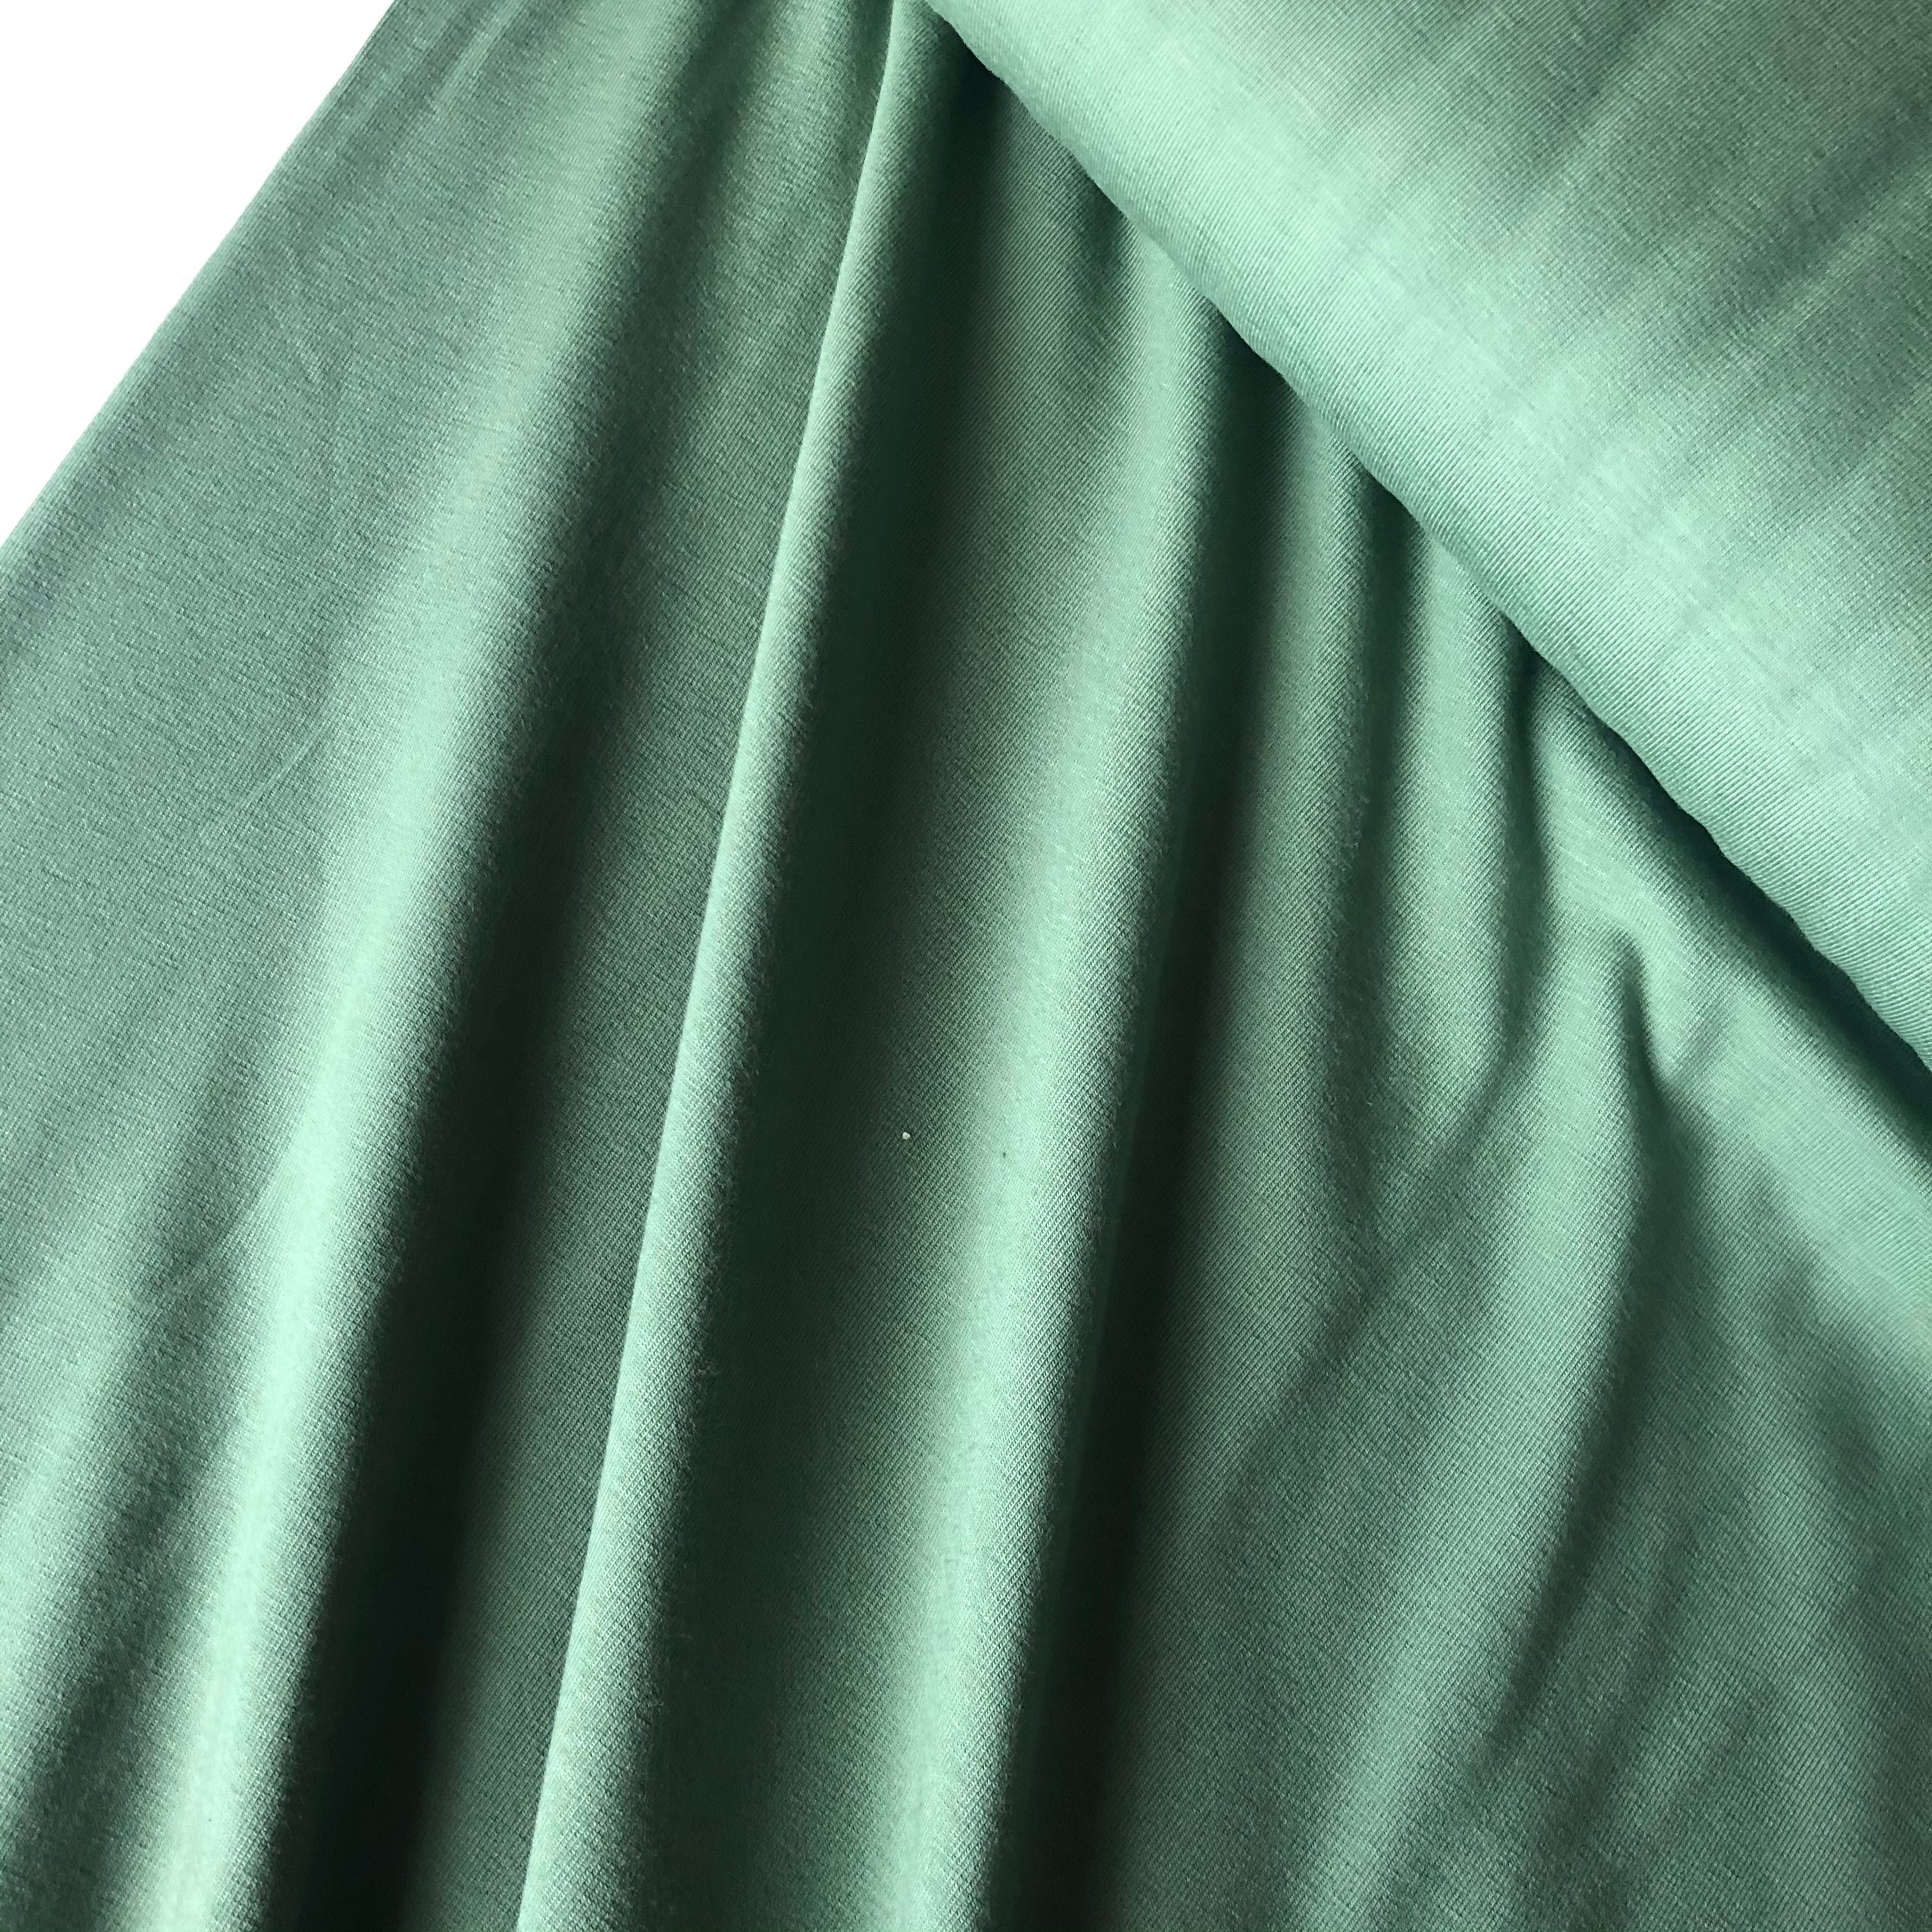 REMNANT 0.48 Metre - Essential Chic Avocado Green Plain Cotton Jersey Fabric